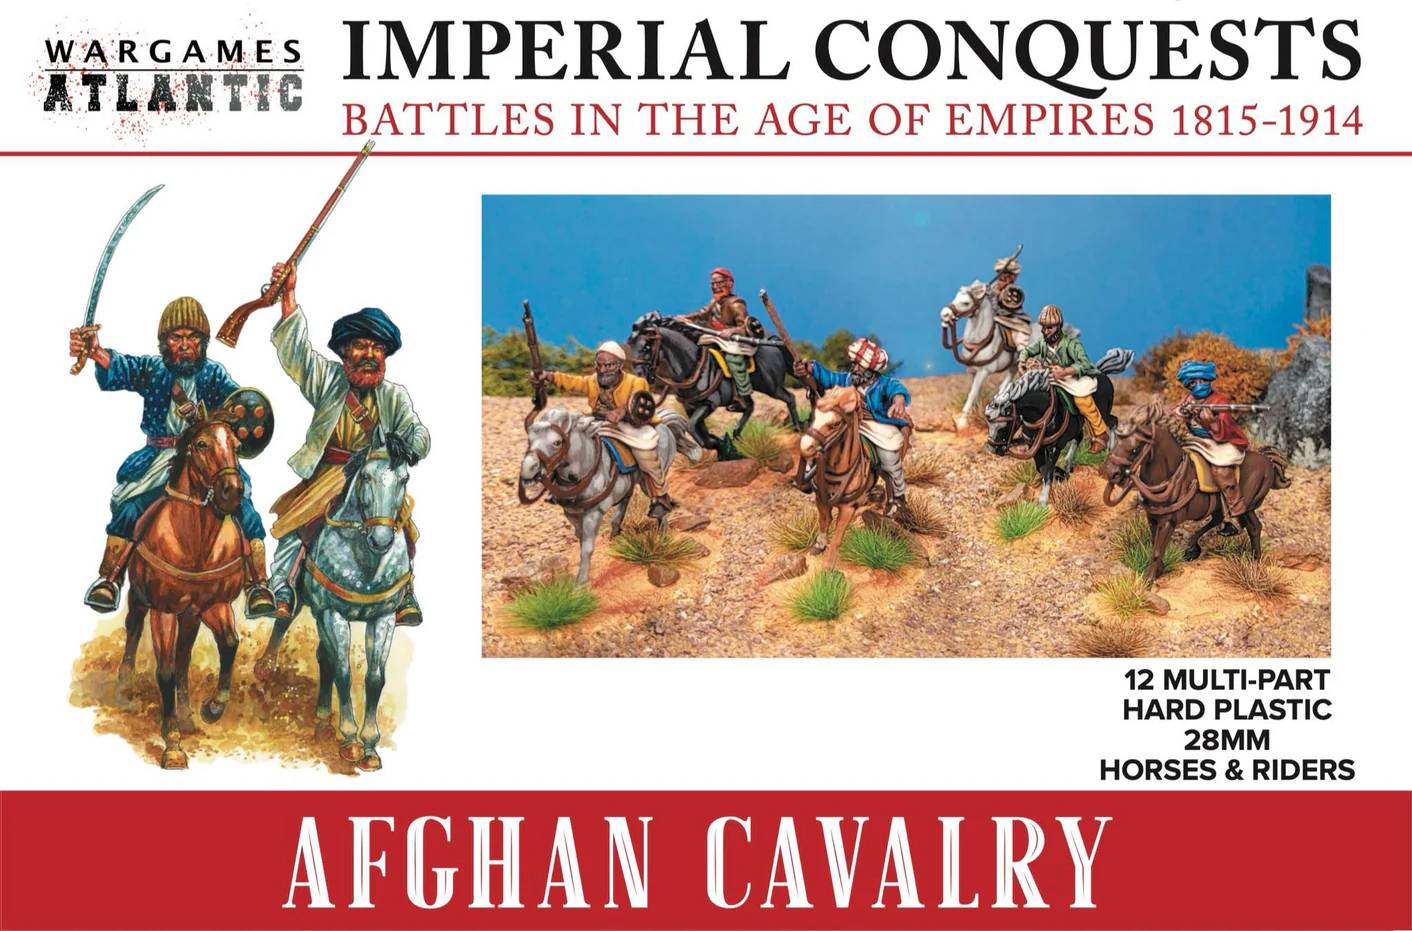 Wargames Atlantic: Imperial Conquests: Afghan Cavalry